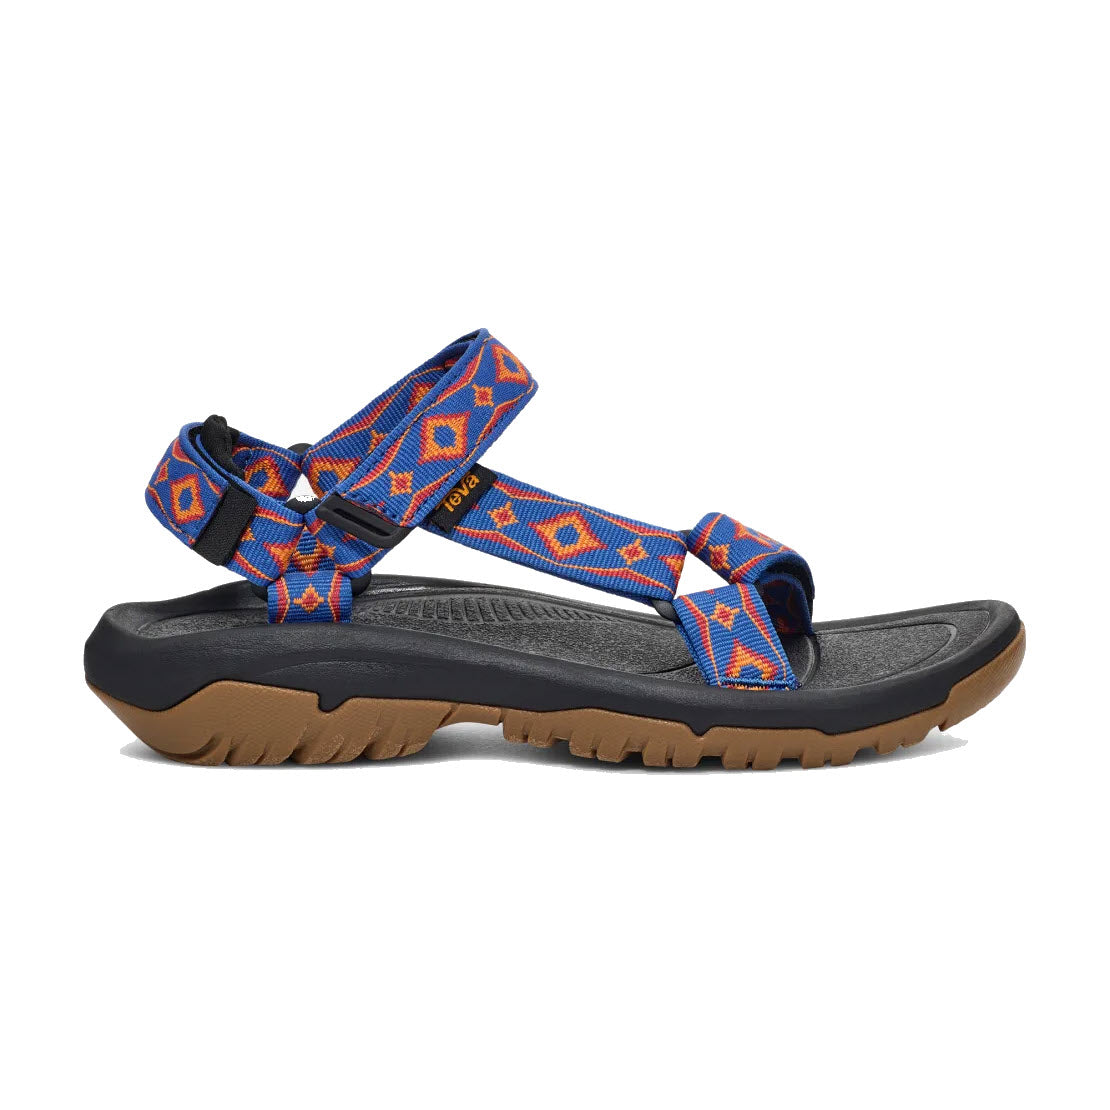 A single Teva TEVA HURRICANE XLT2 90S ARCHIVAL REVIVAL - WOMENS sport sandal with blue and orange heritage strap designs, featuring a black footbed and a brown rubber sole, displayed on a white background.